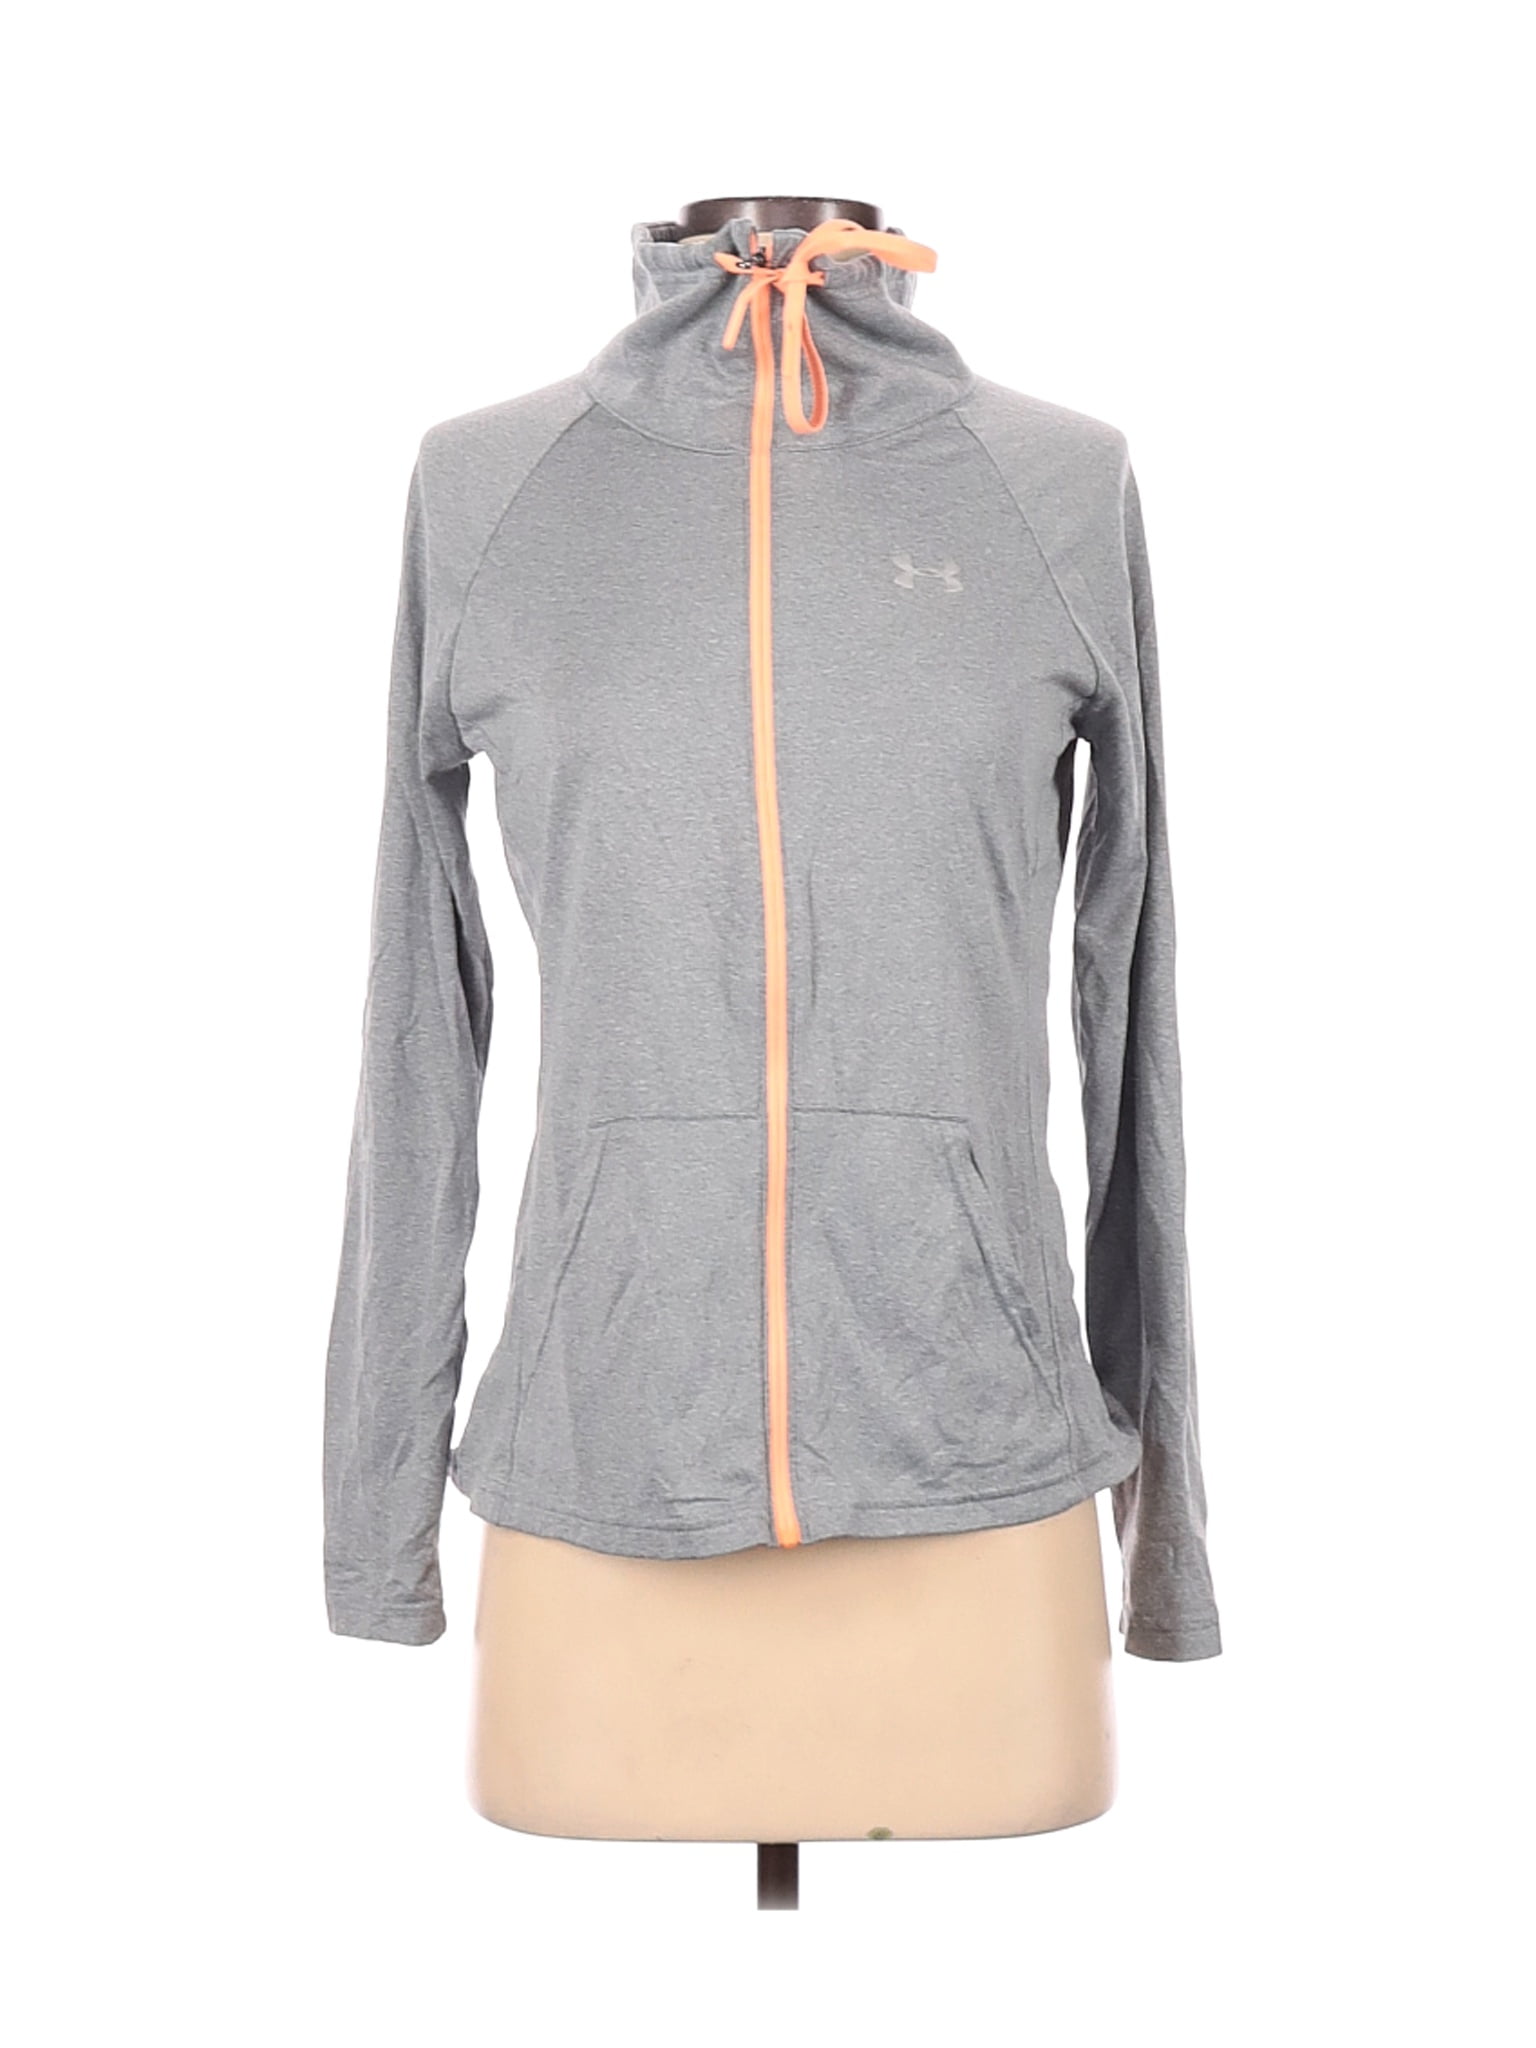 under armour track jacket women's